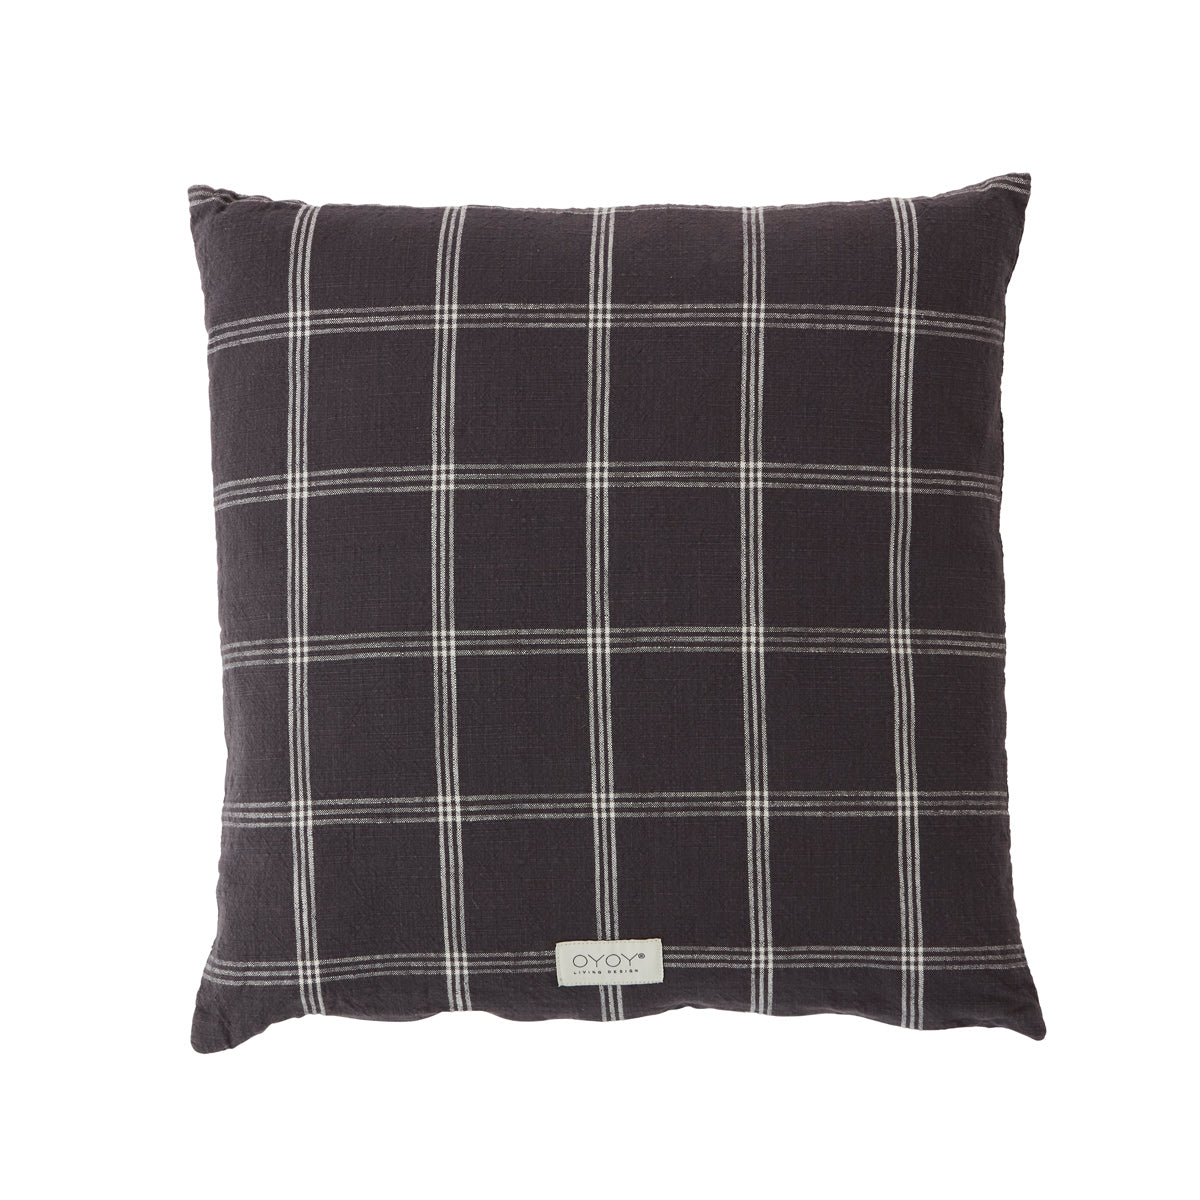 OYOY Living design Cushion Kyoto Square - Anthracite